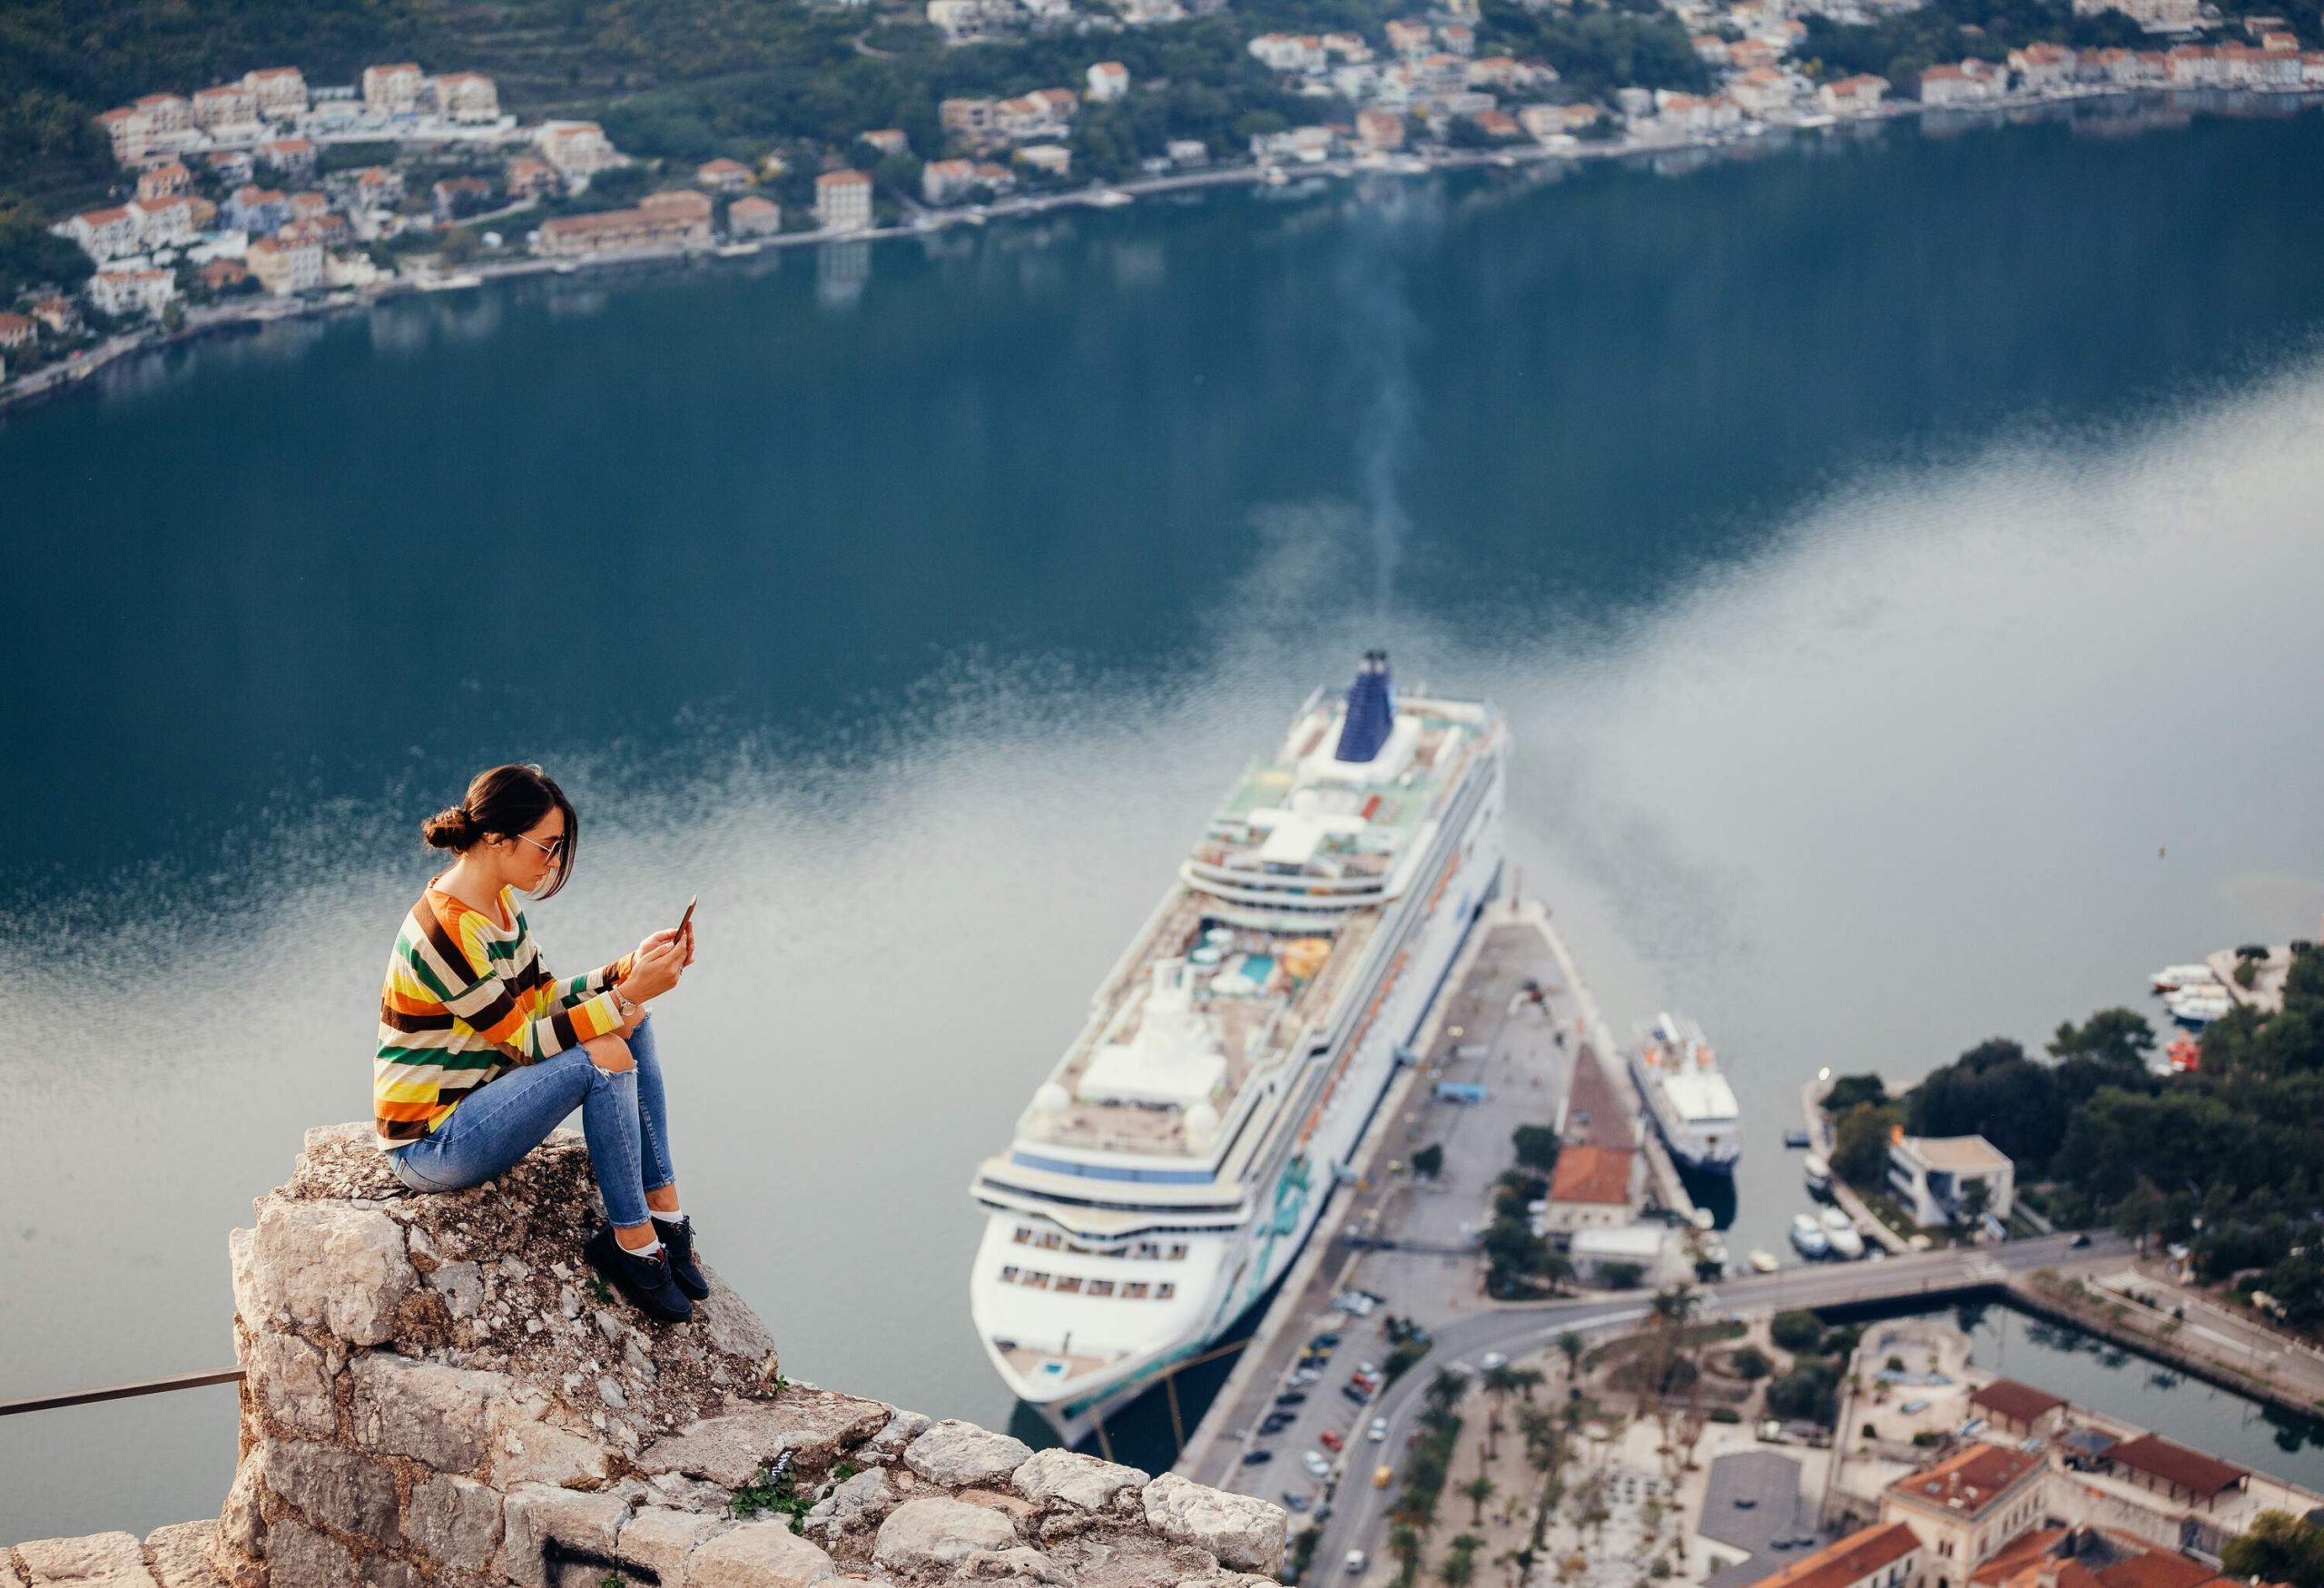 A young woman using a smartphone while sitting on a ledge overlooking a big ship docked in a harbour.